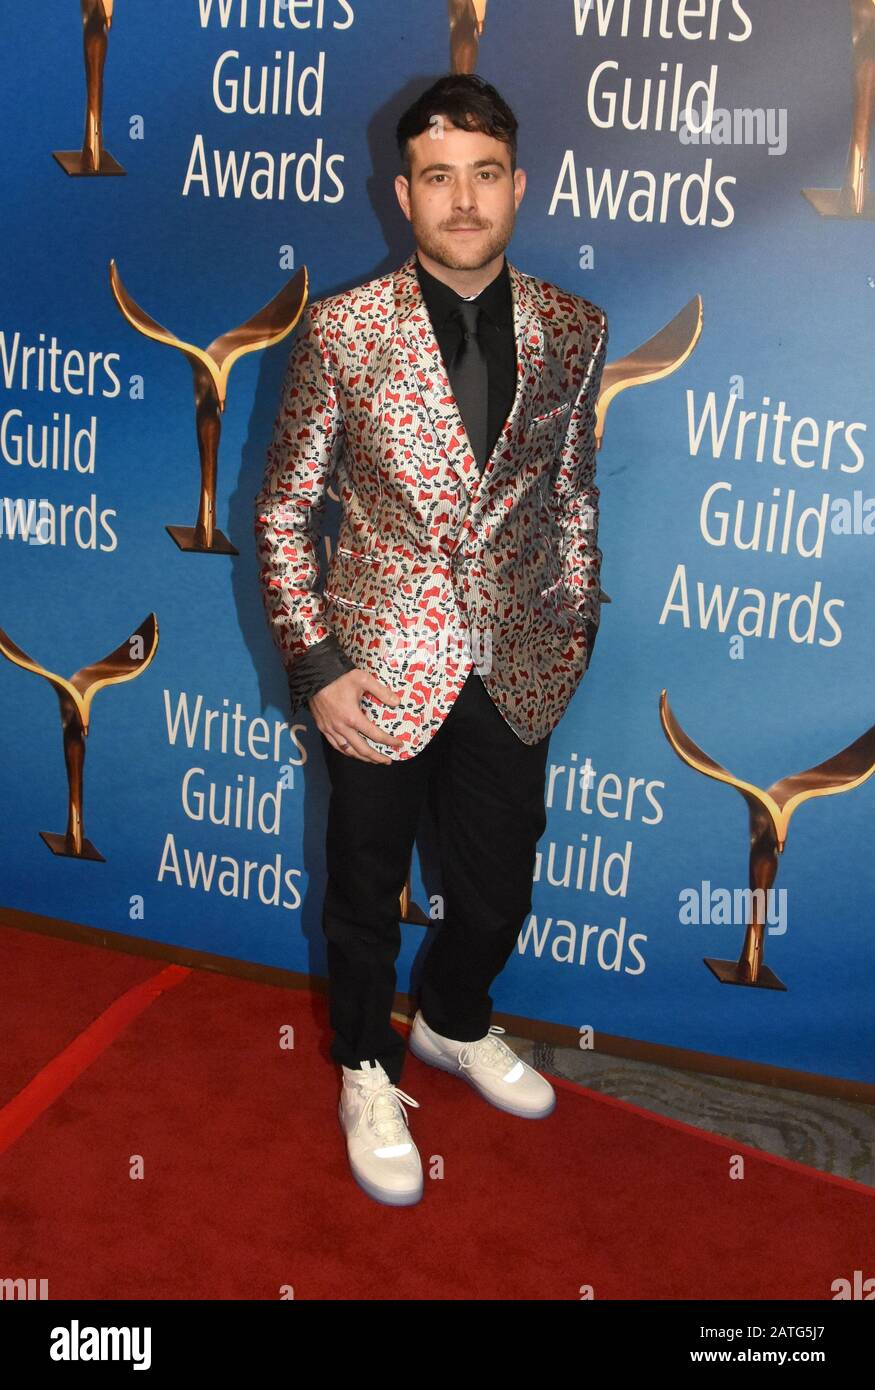 Beverly Hills, California, USA 1st February 2020 Writer Max Borenstein attends the 2020 Writers Guild Awards West Coast Ceremony on February 01, 2020 at The Beverly Hilton Hotel in Beverly Hills, California, USA. Photo by Barry King/Alamy Stock Photo Stock Photo